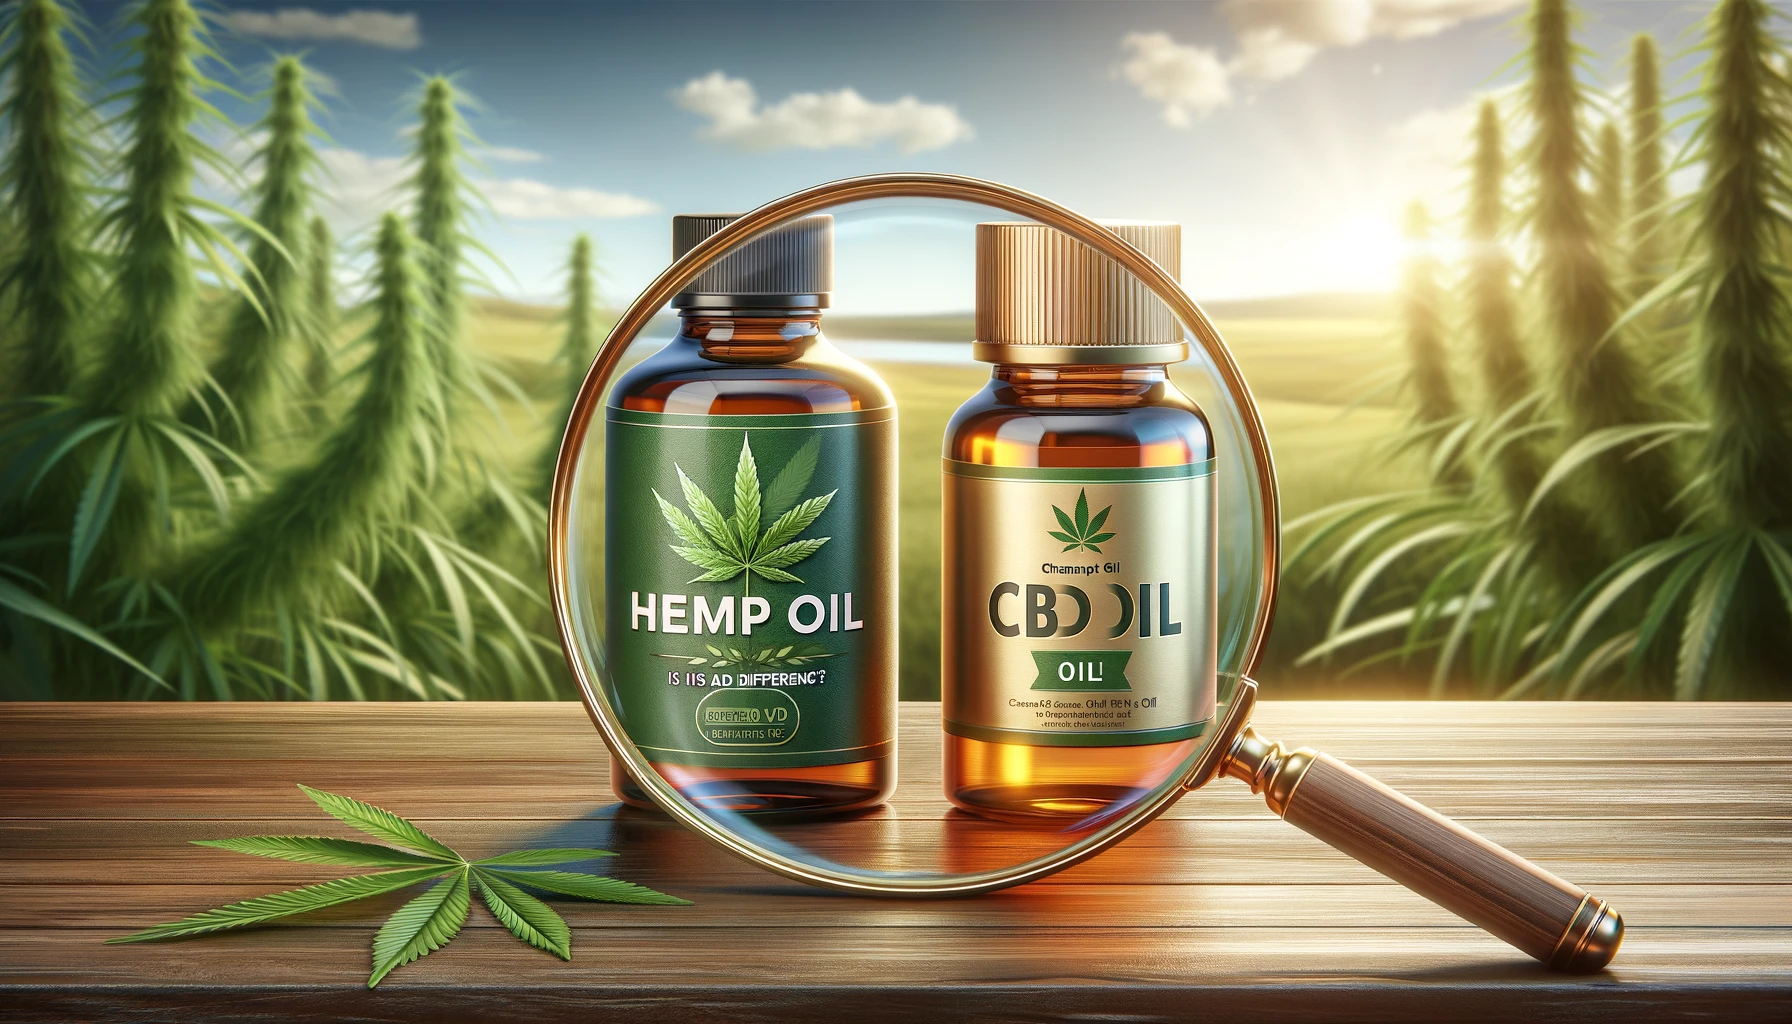 Hemp Oil vs CBD Oil: Is There a Difference?